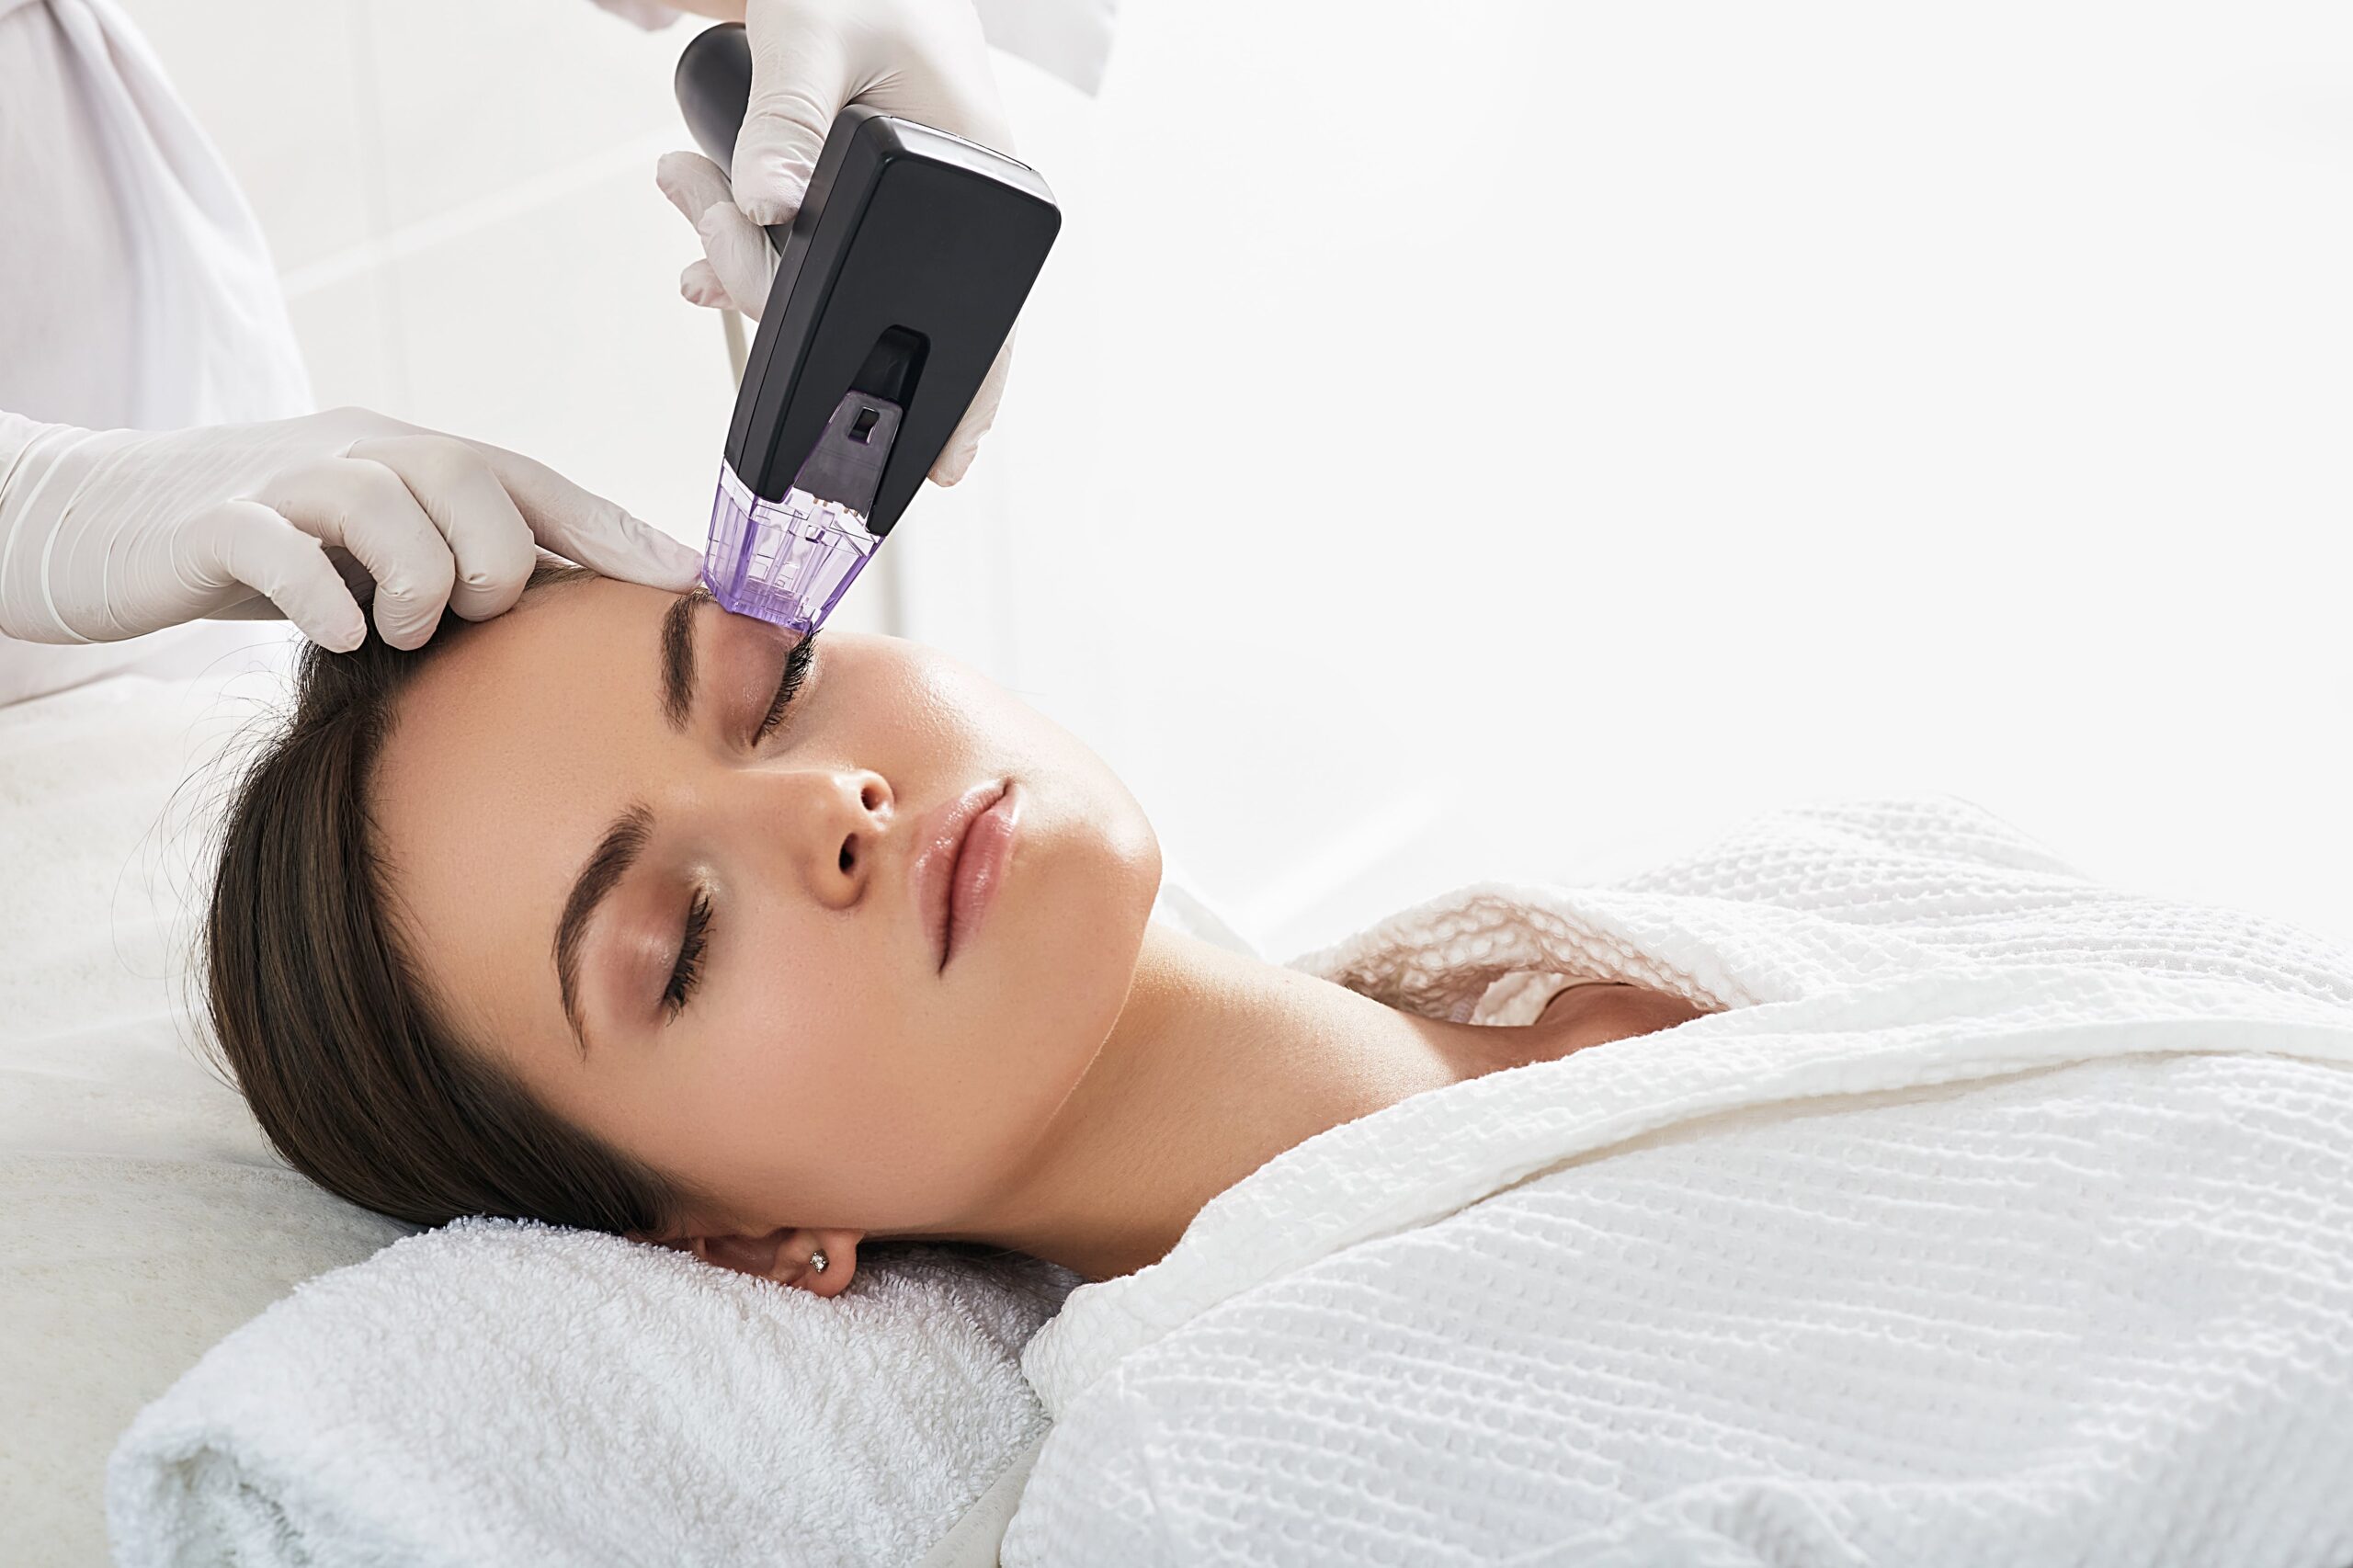 Laser Treatment for Hair Removal